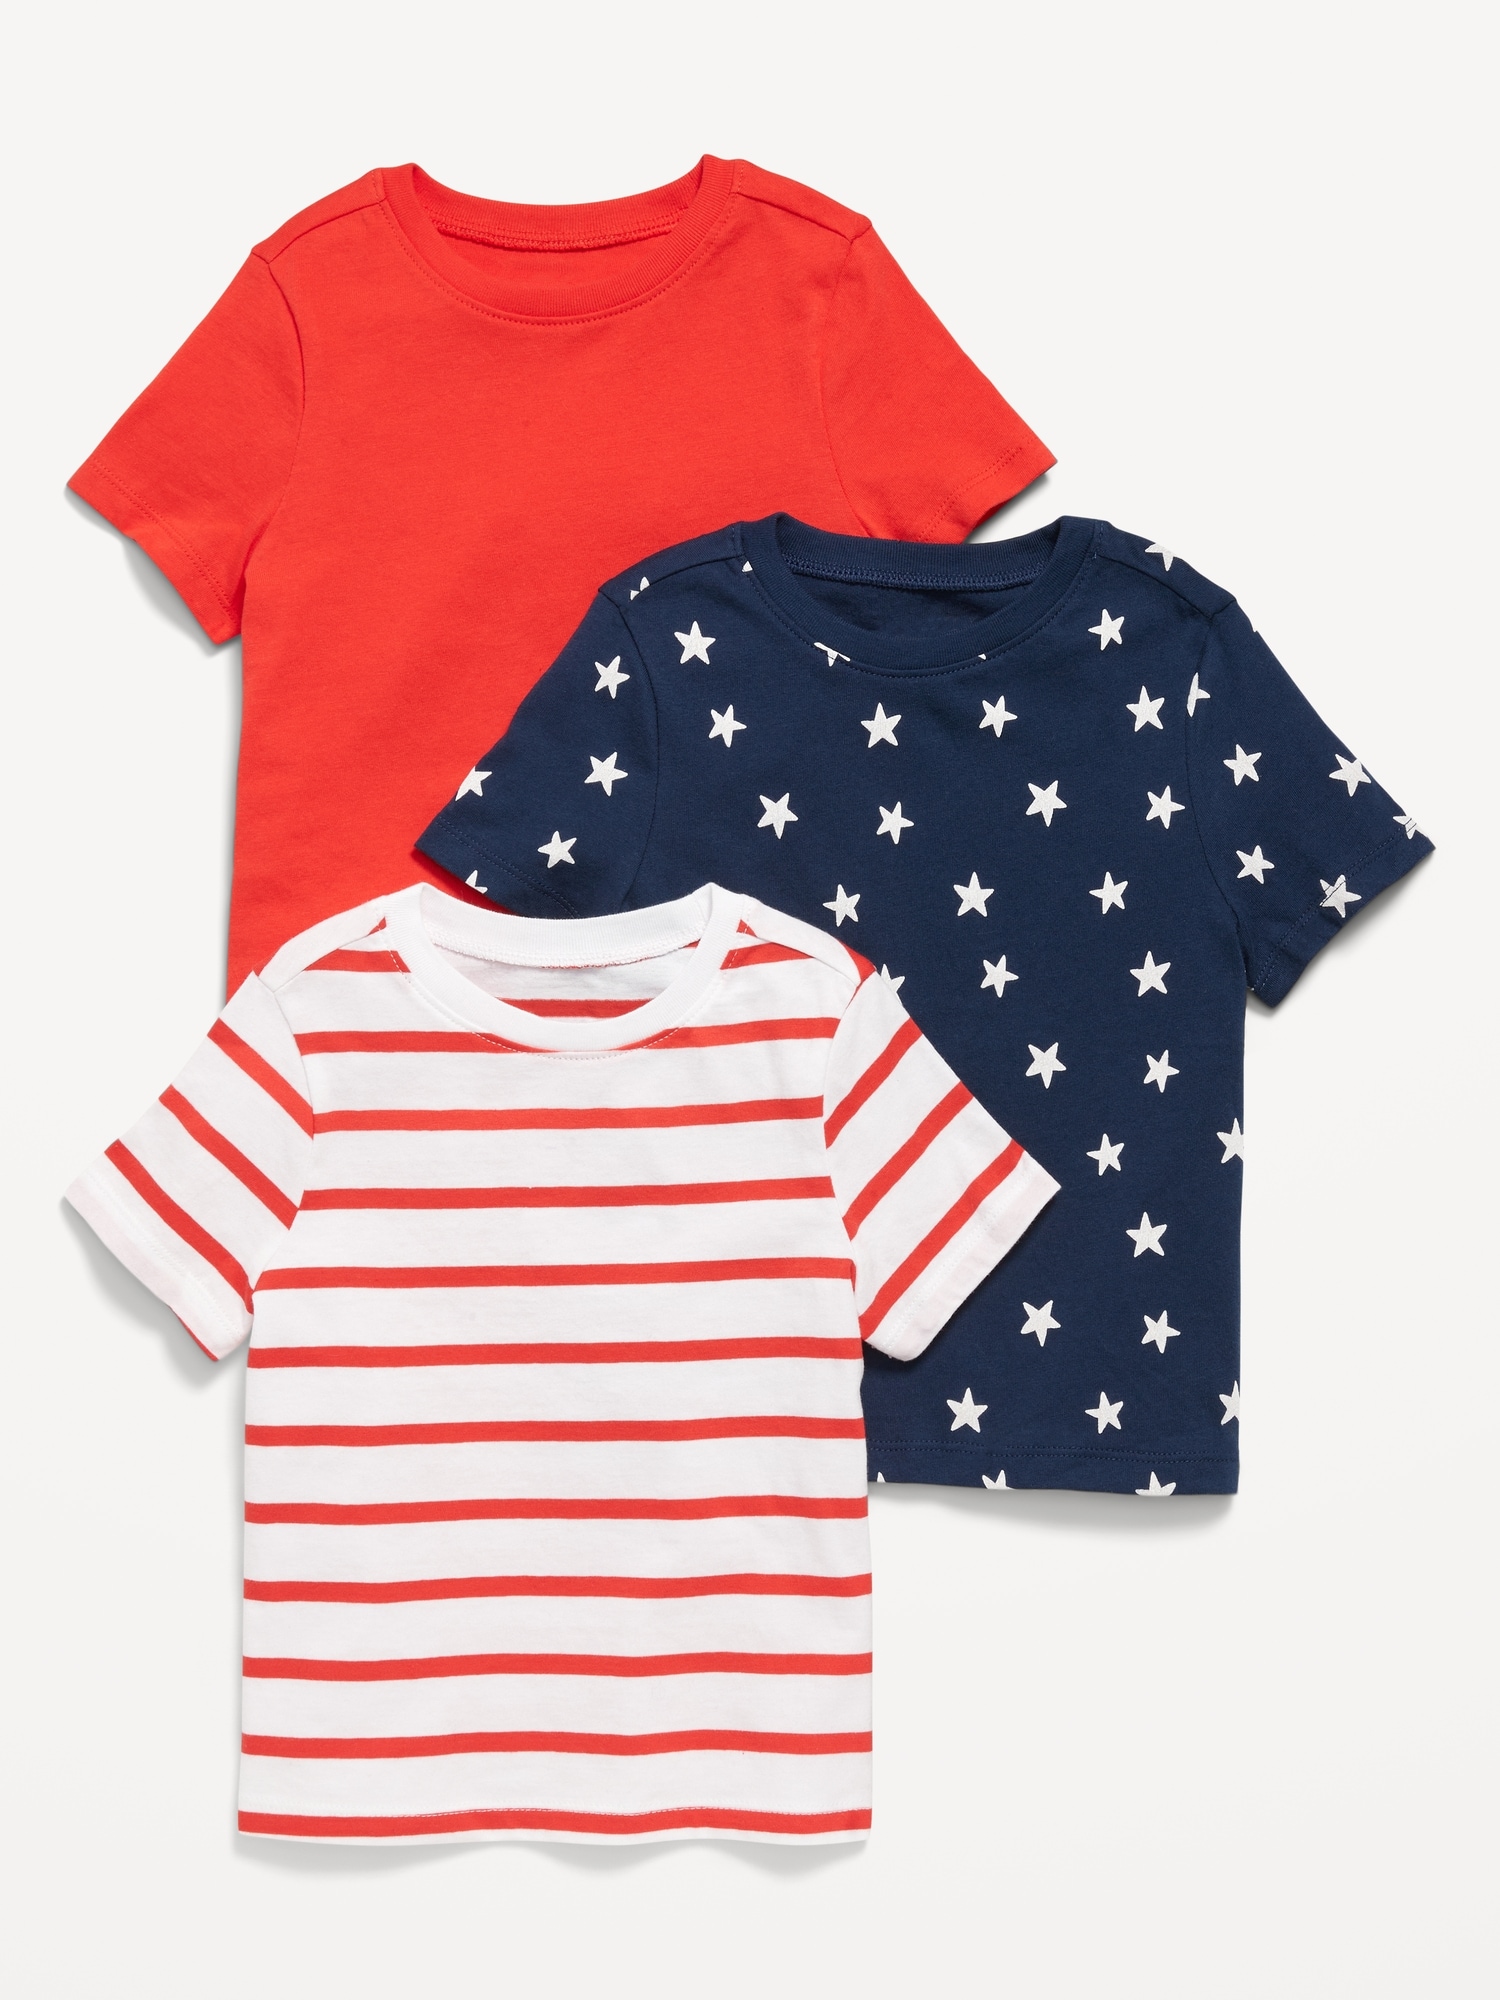 Unisex Solid T-Shirt 3-Pack for Toddler Hot Deal